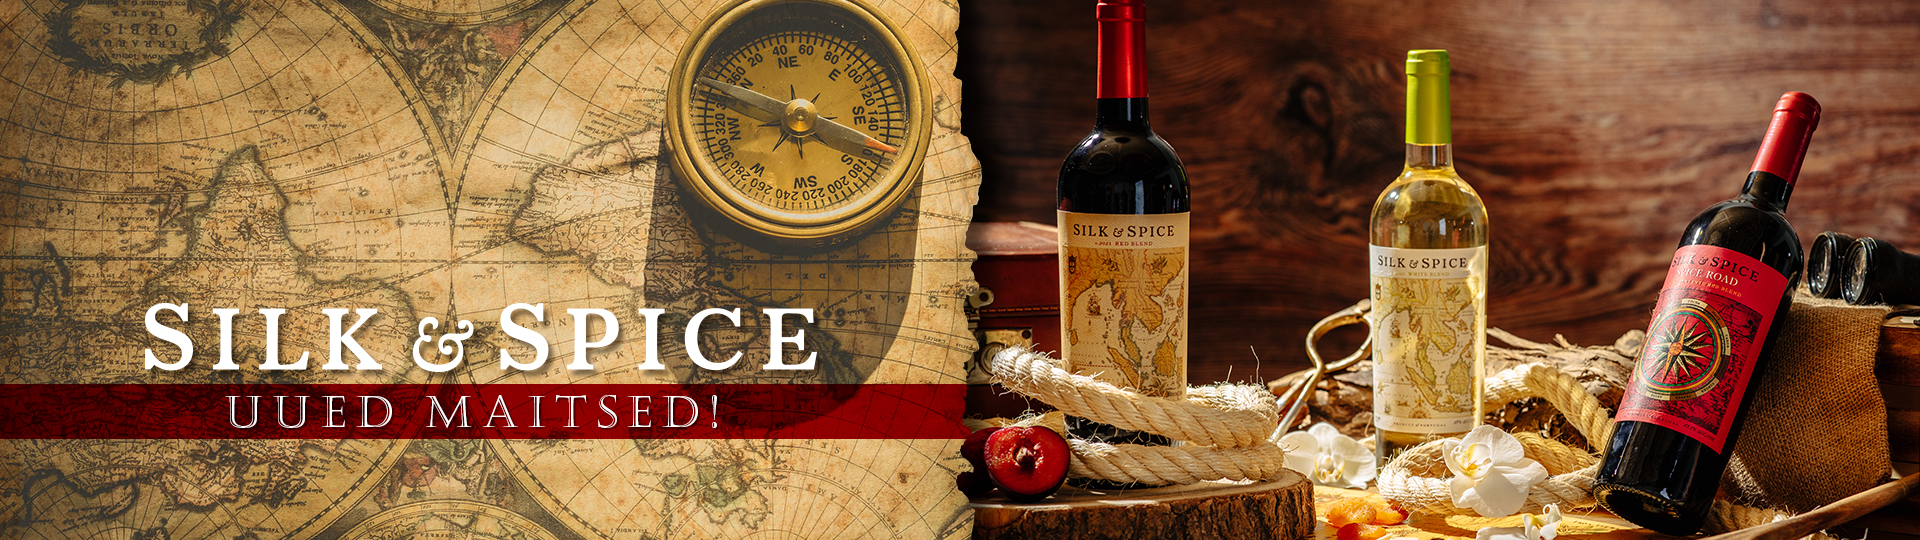 Silk & Spice Red Blend uued maitsed